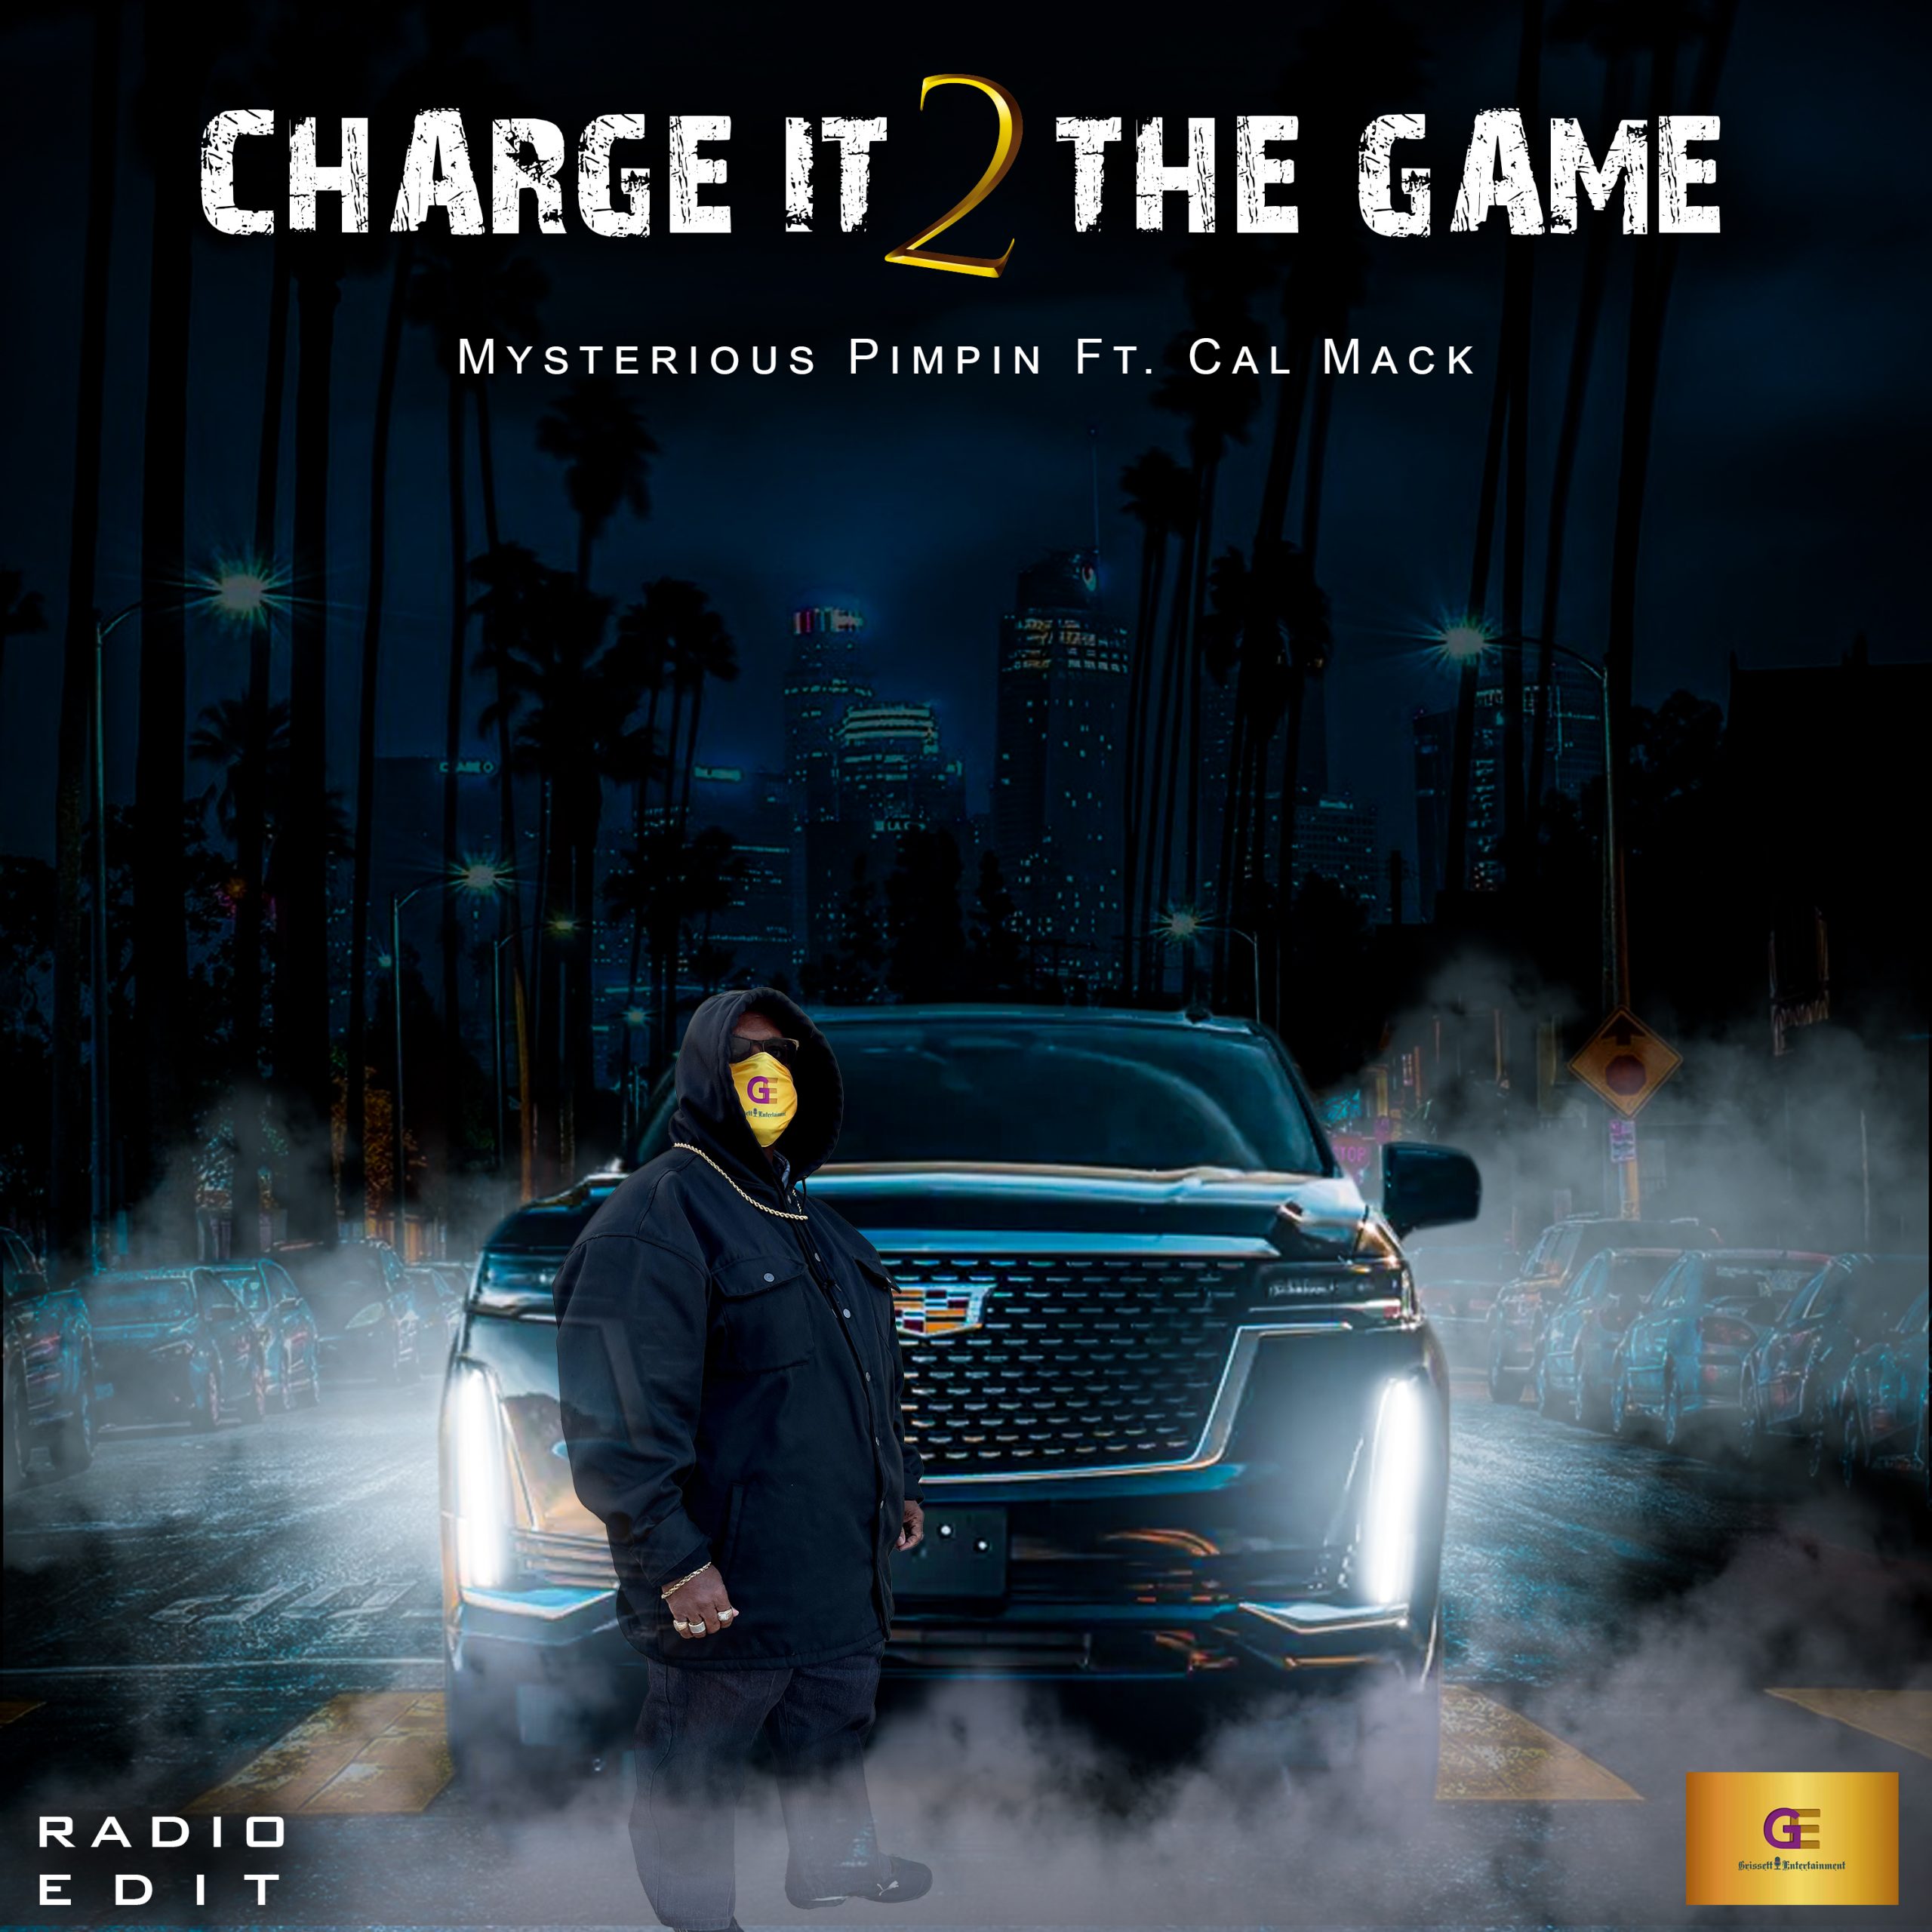 Immerse Yourself in the Enigmatic Soundscape of Mysterious Pimpin Ft Cal Mack’s ‘Charge It 2 The Game’ – A Hip Hop Rap Triumph on the playlist.